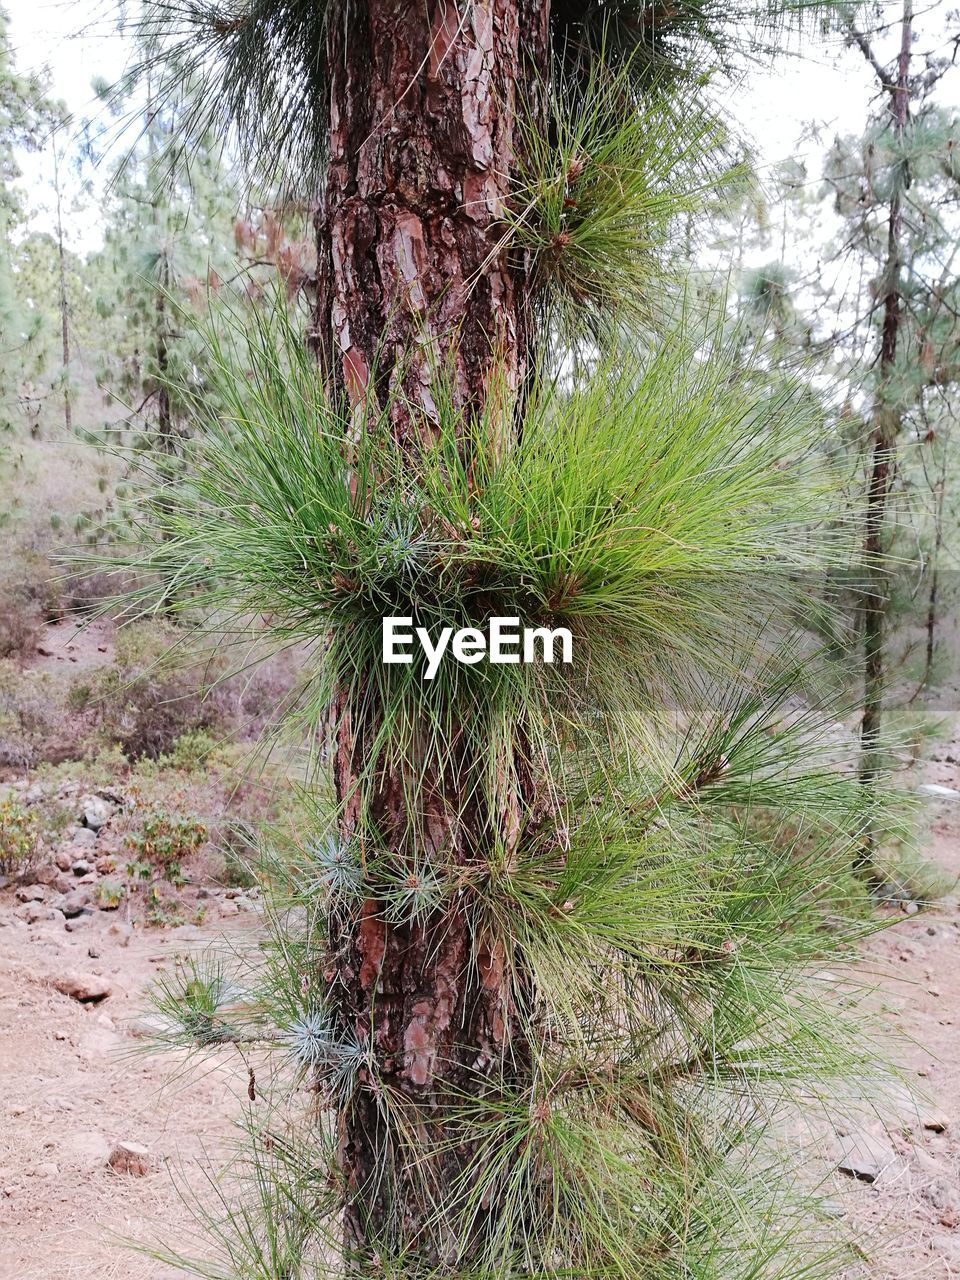 CLOSE-UP OF PINE TREE IN FIELD